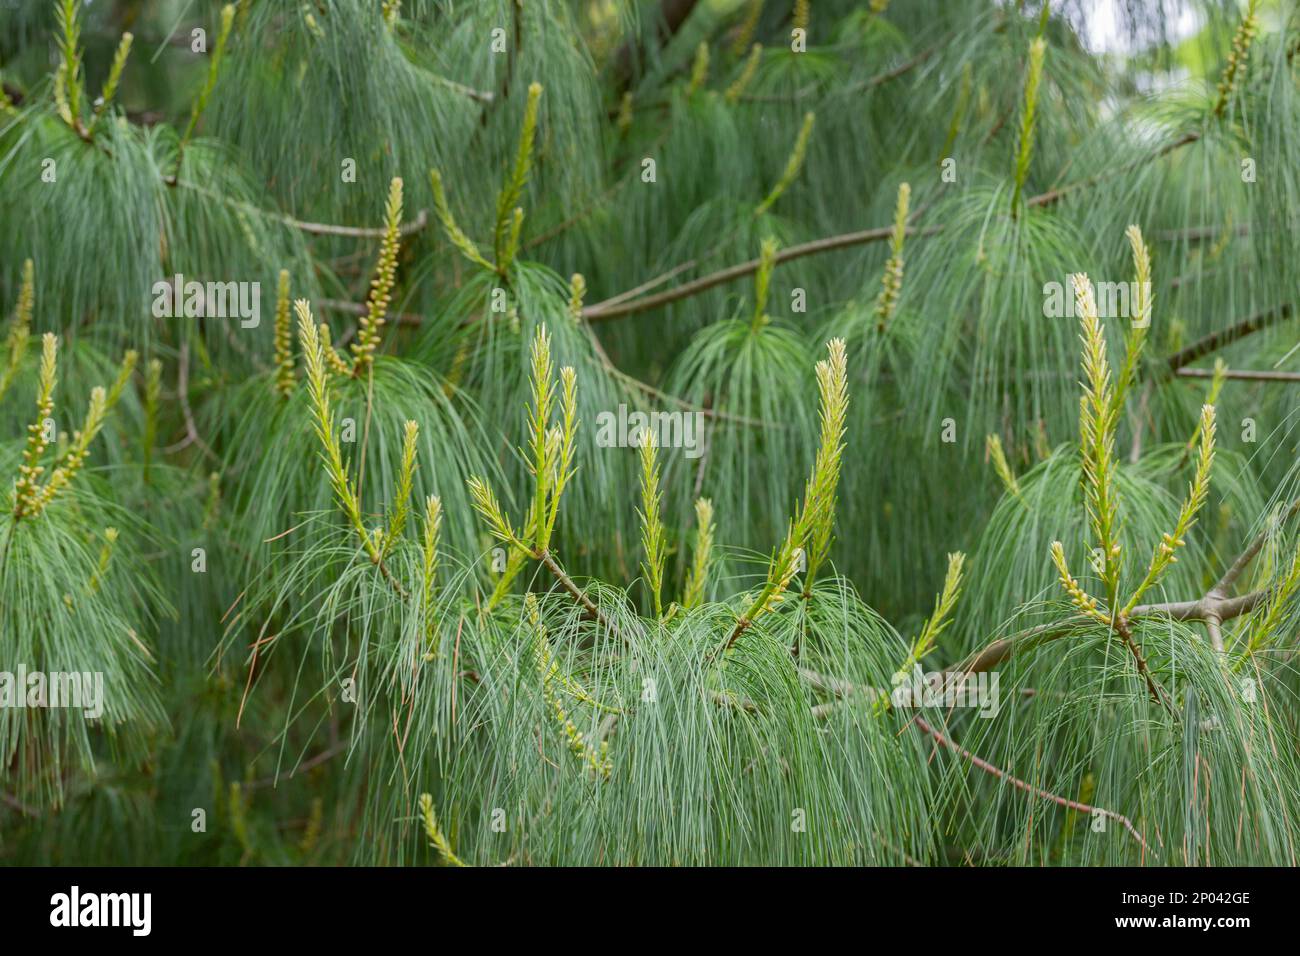 Close-up silky long needles of beautiful pine tree Pinus leiophylla schiede. Evergreen tree in sunny spring day in Arboretum Park Southern Cultures in Stock Photo